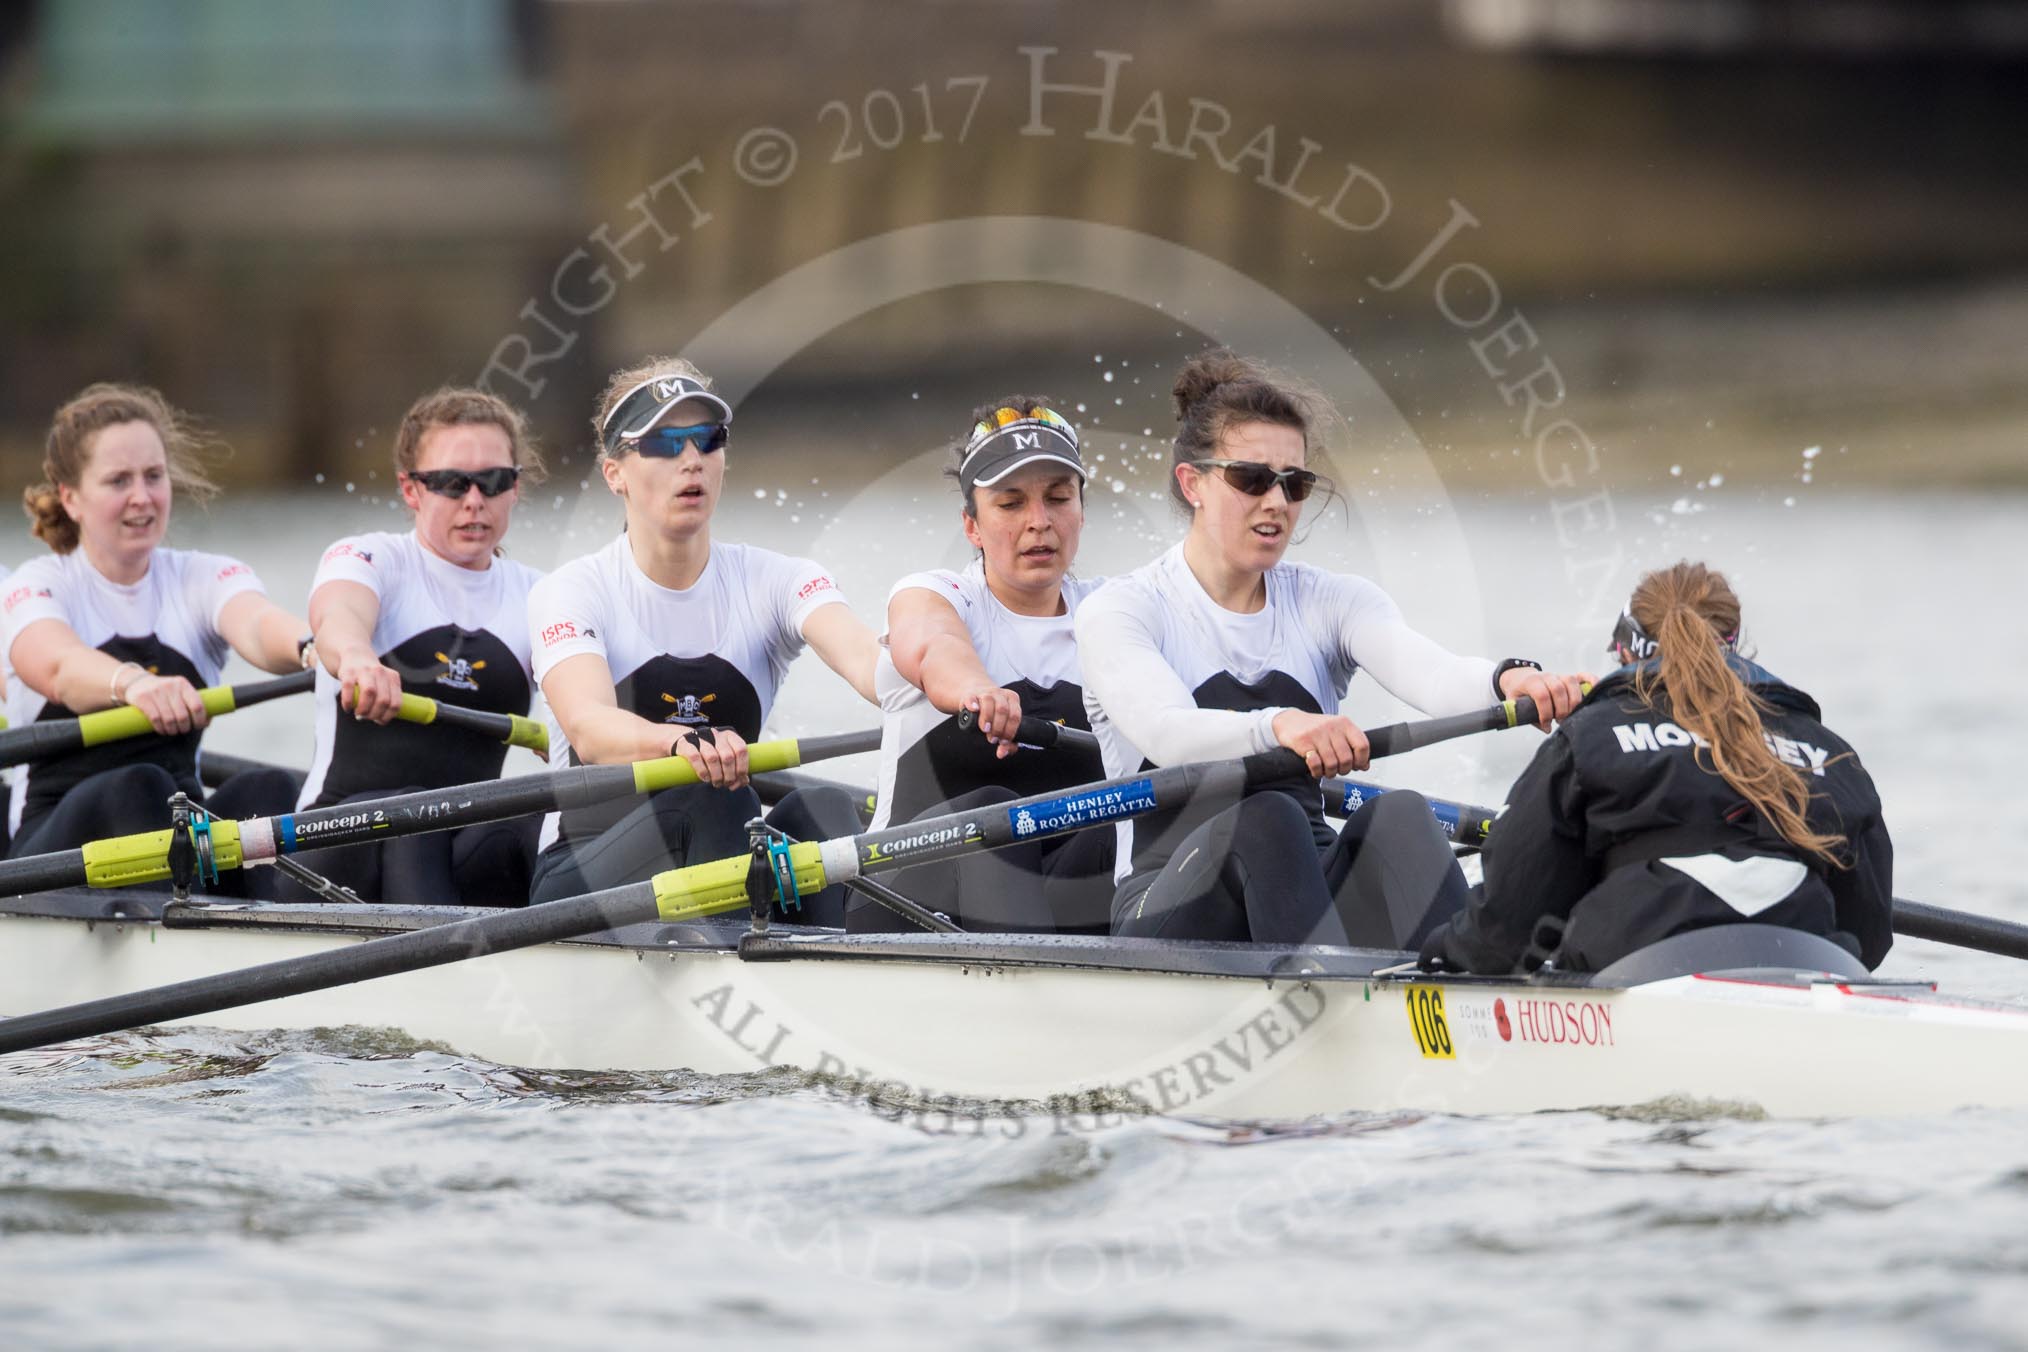 The Cancer Research UK Boat Race season 2017 - Women's Boat Race Fixture OUWBC vs Molesey BC: The Molesey boat, here 4 Claire McKeown, 5 Katie Bartlett, 6 Elo Luik, 7 Gabriella Rodriguez, stroke Ruth Whyman, cox Anna Corderoy.
River Thames between Putney Bridge and Mortlake,
London SW15,

United Kingdom,
on 19 March 2017 at 16:07, image #99